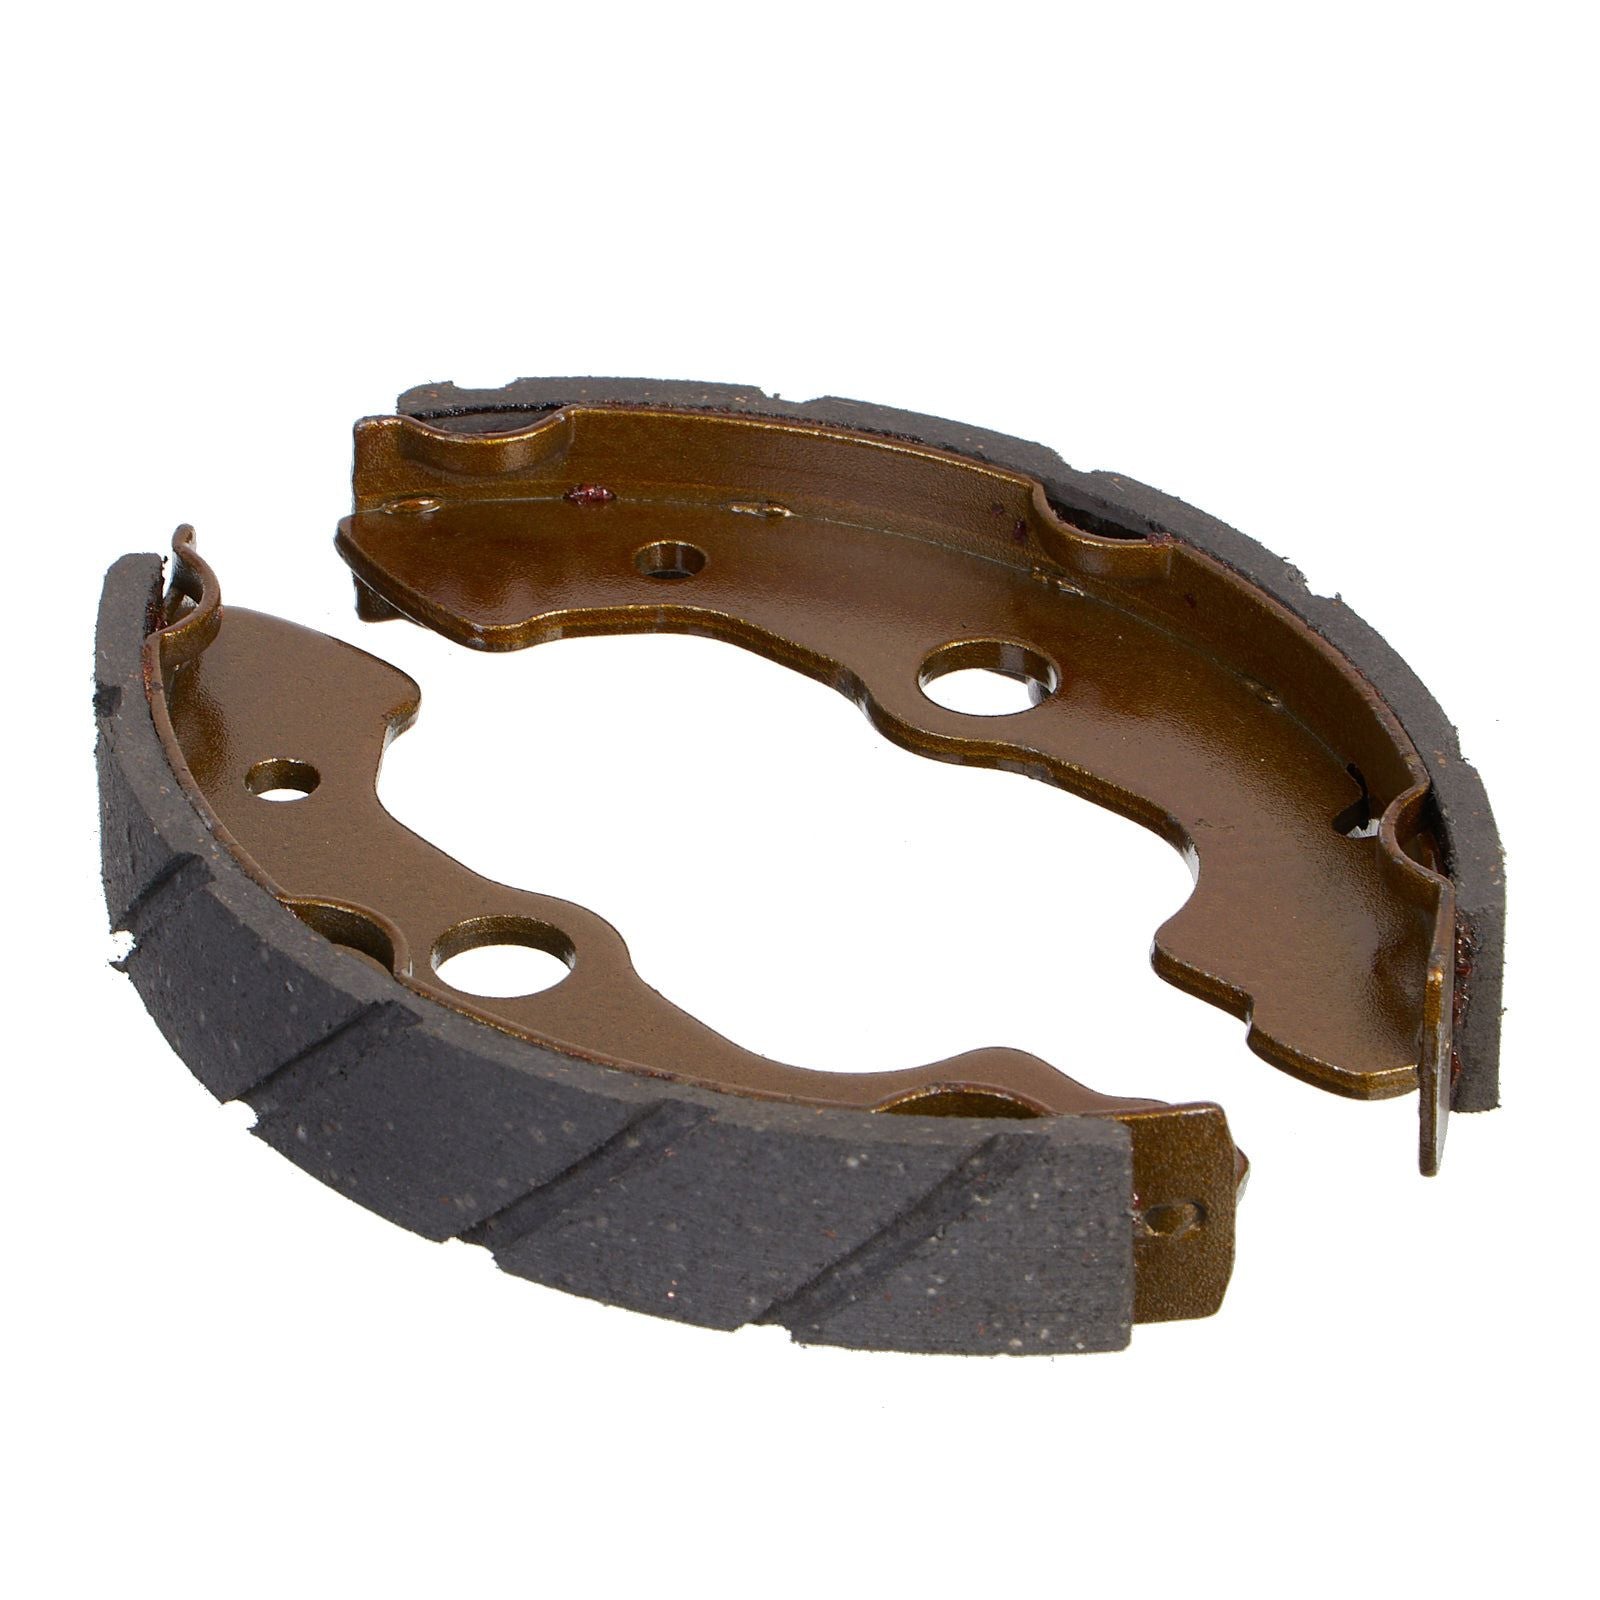 New WHITES Motorcycle Brake Shoes - Water Groove #WPBS39181